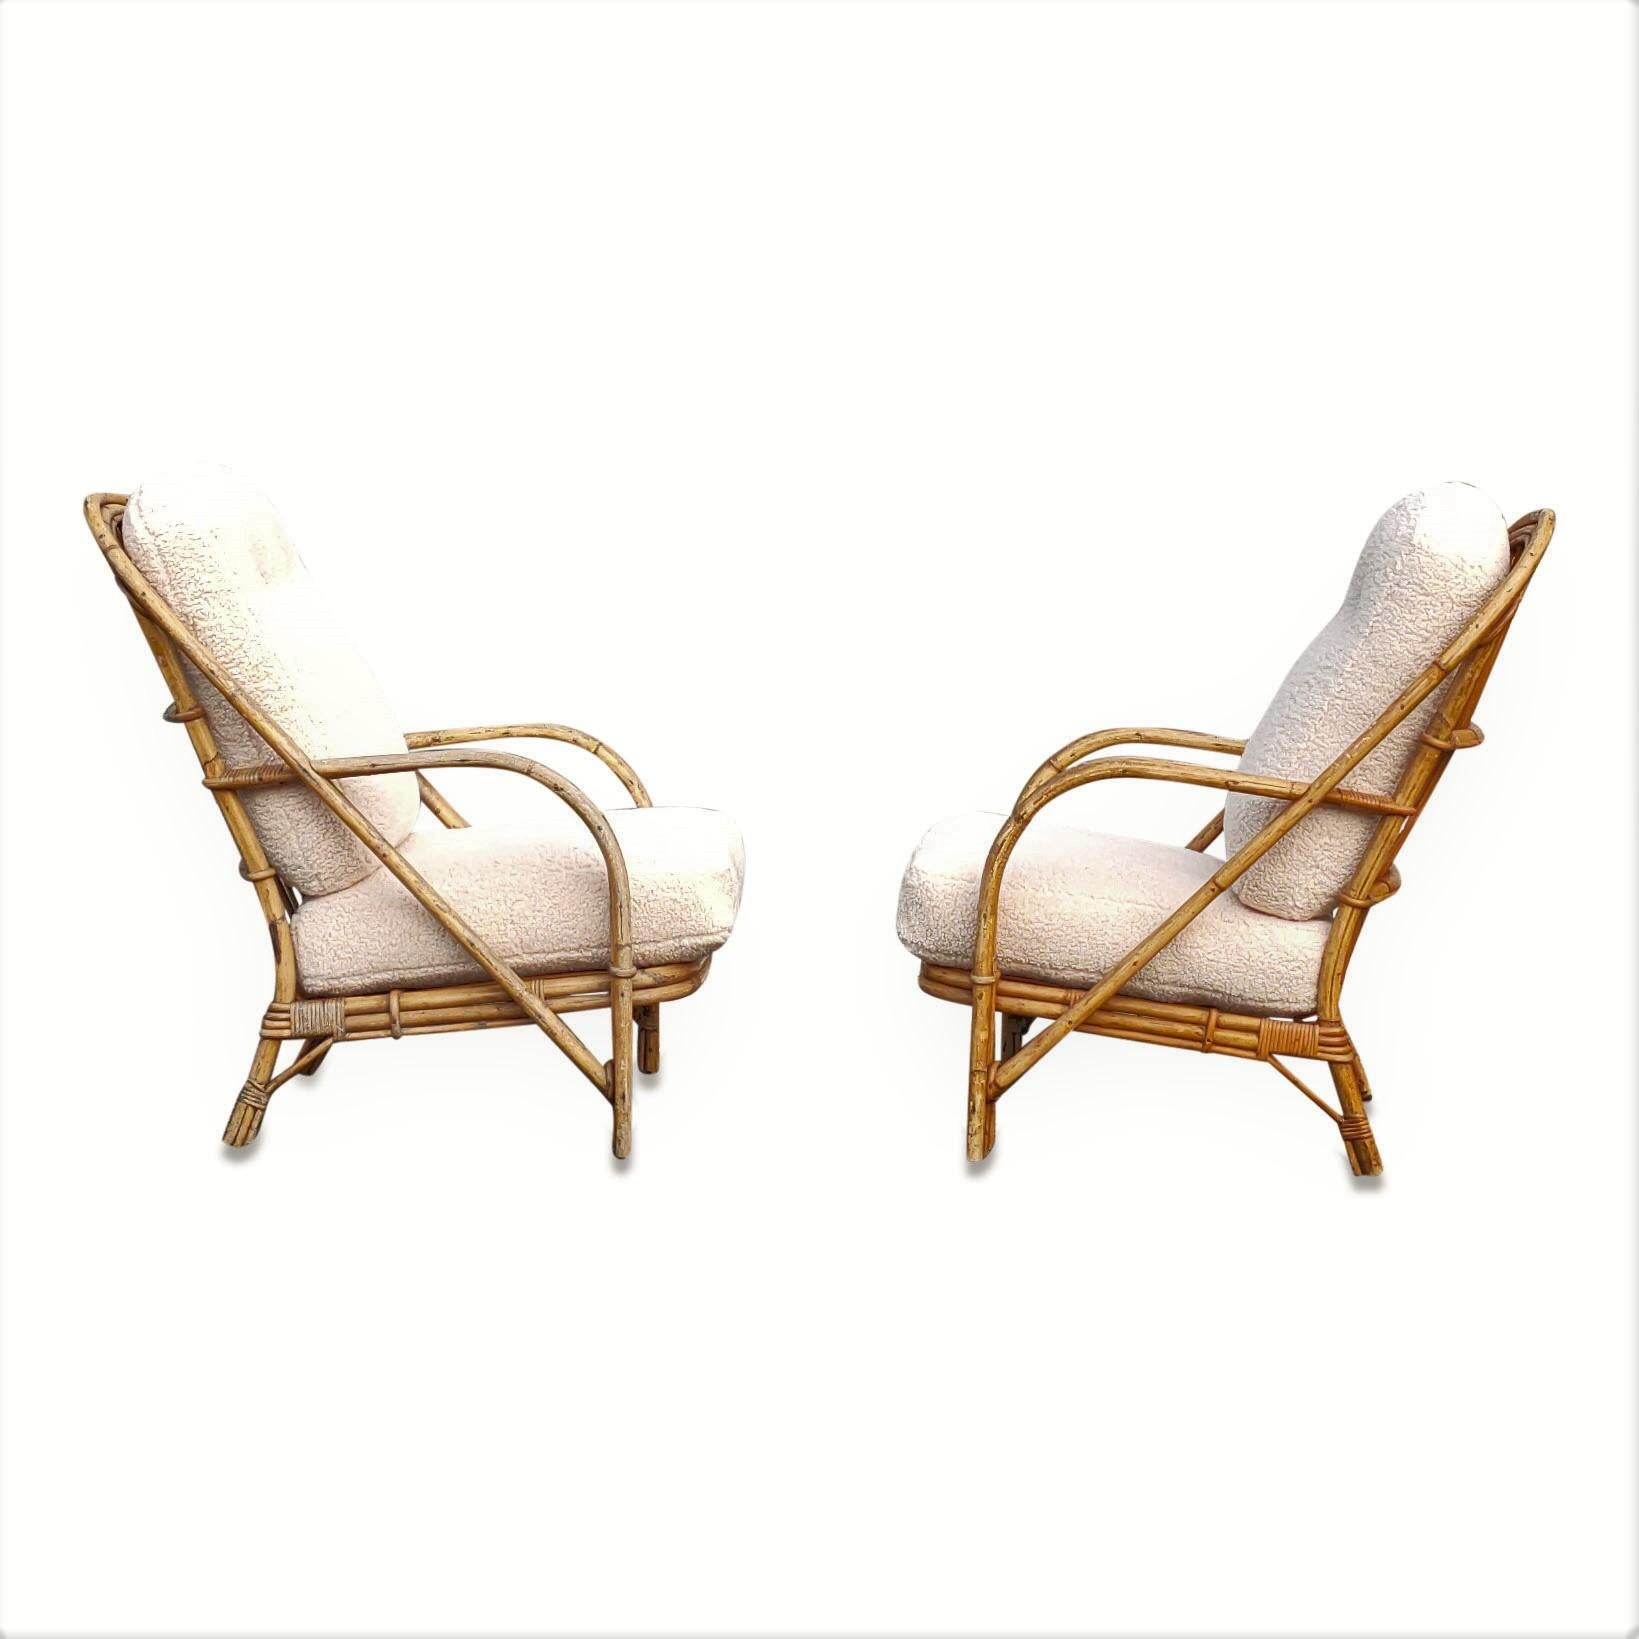 Mid-20th Century Pair of Wicker Armchairs by Audoux Minnet, France, 1960s